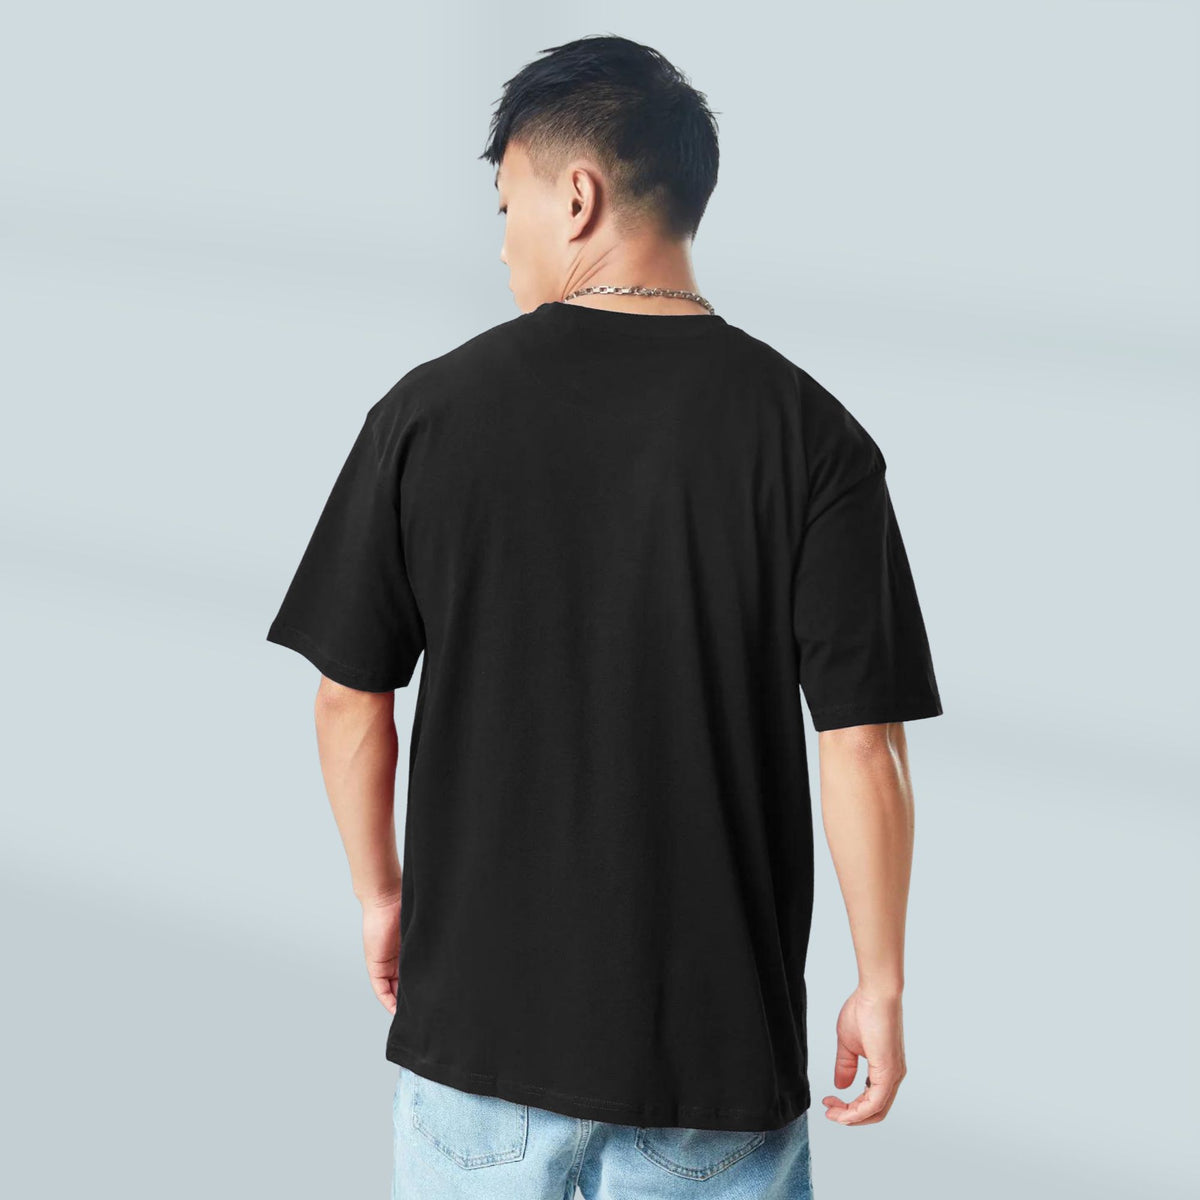 Black Oversized T shirt: The Ultimate Solid Streetwear Style